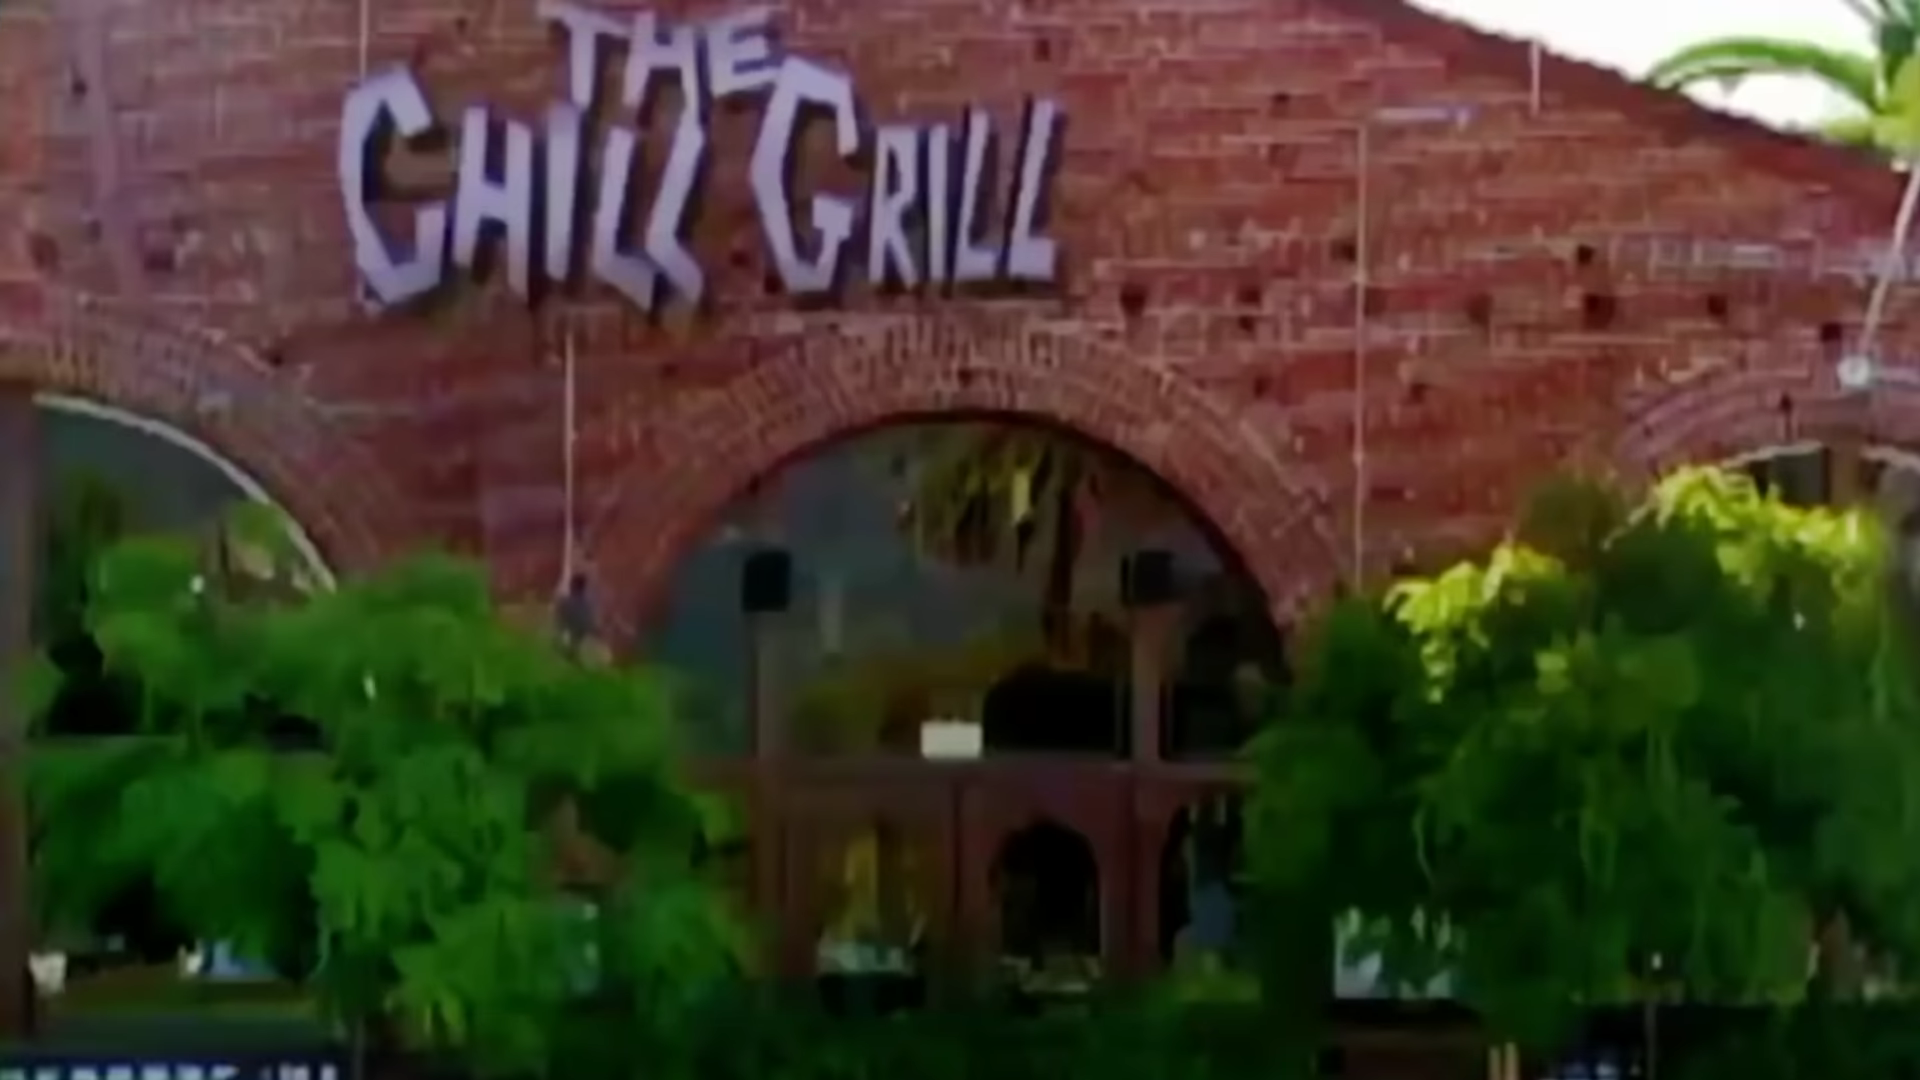 The Chill Grill | Raven's Home Wiki